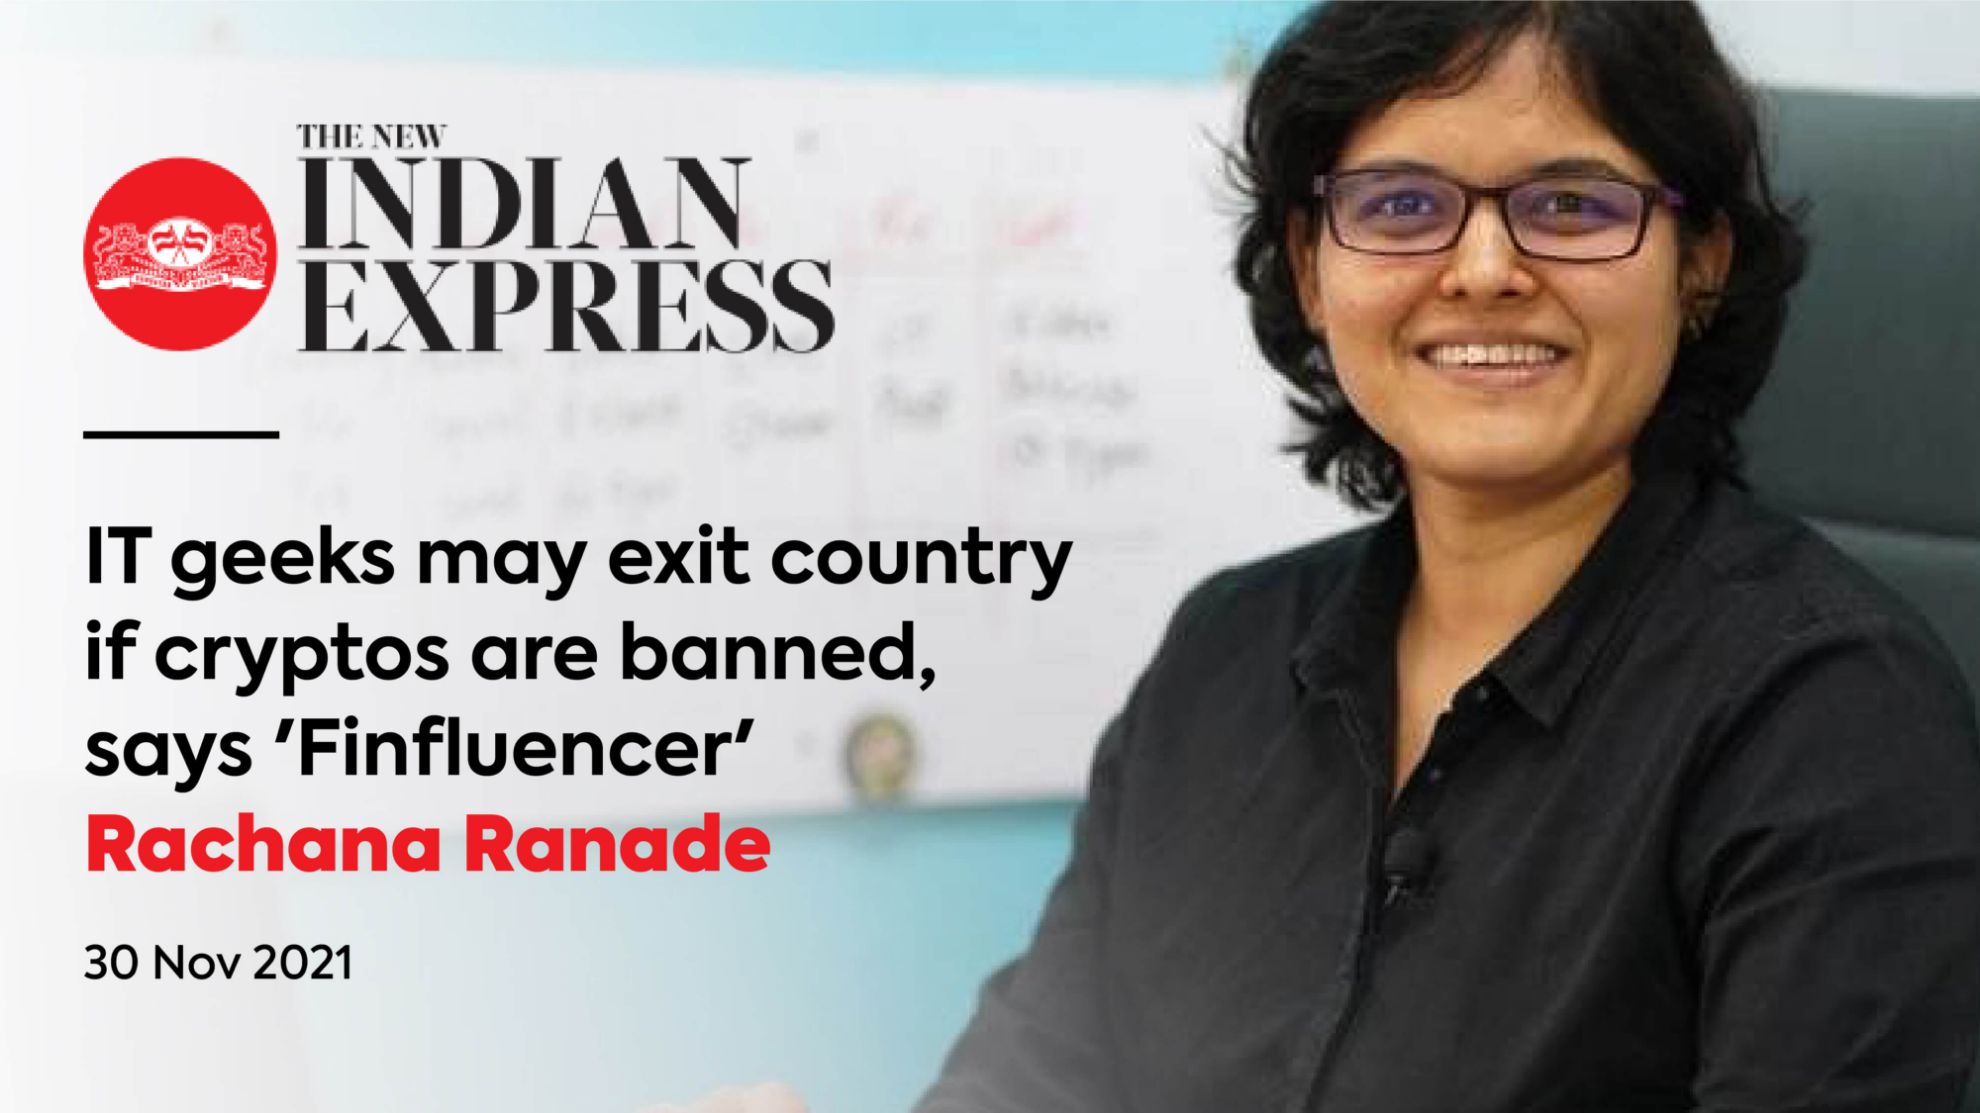 IT geeks may exit country if cryptos are banned, says 'Finfluencer' Rachana Ranade